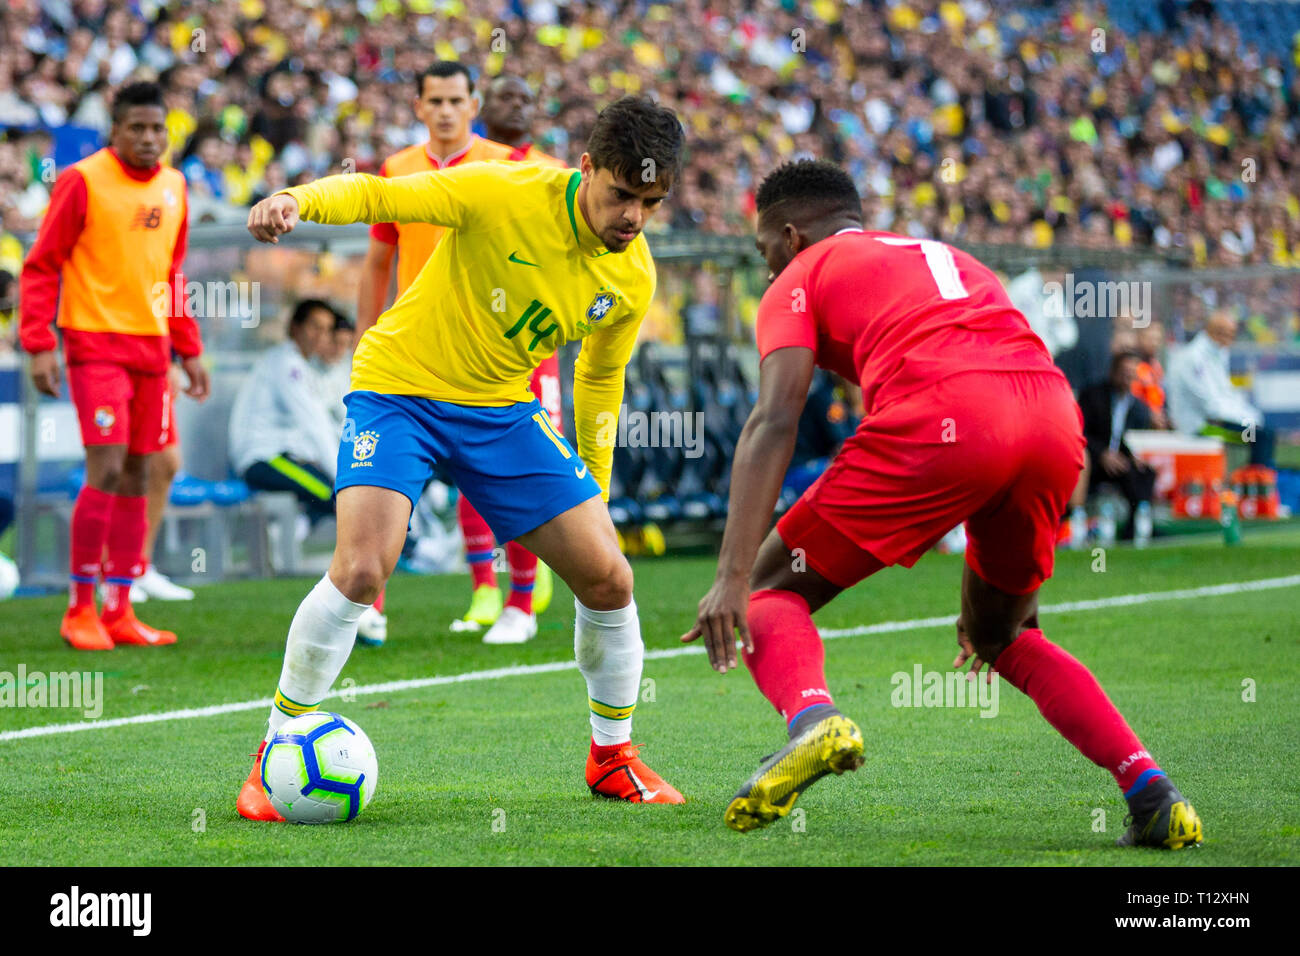 Brazil player Fagner Lemos (L) and Panama player Fidel Escobar (R) are seen in action during the friendly football match between Brazil and Panama for the Brazil Global Tour at Dragon Stadium in Porto. ( Final score; Brazil 1:1 Panama ) Stock Photo